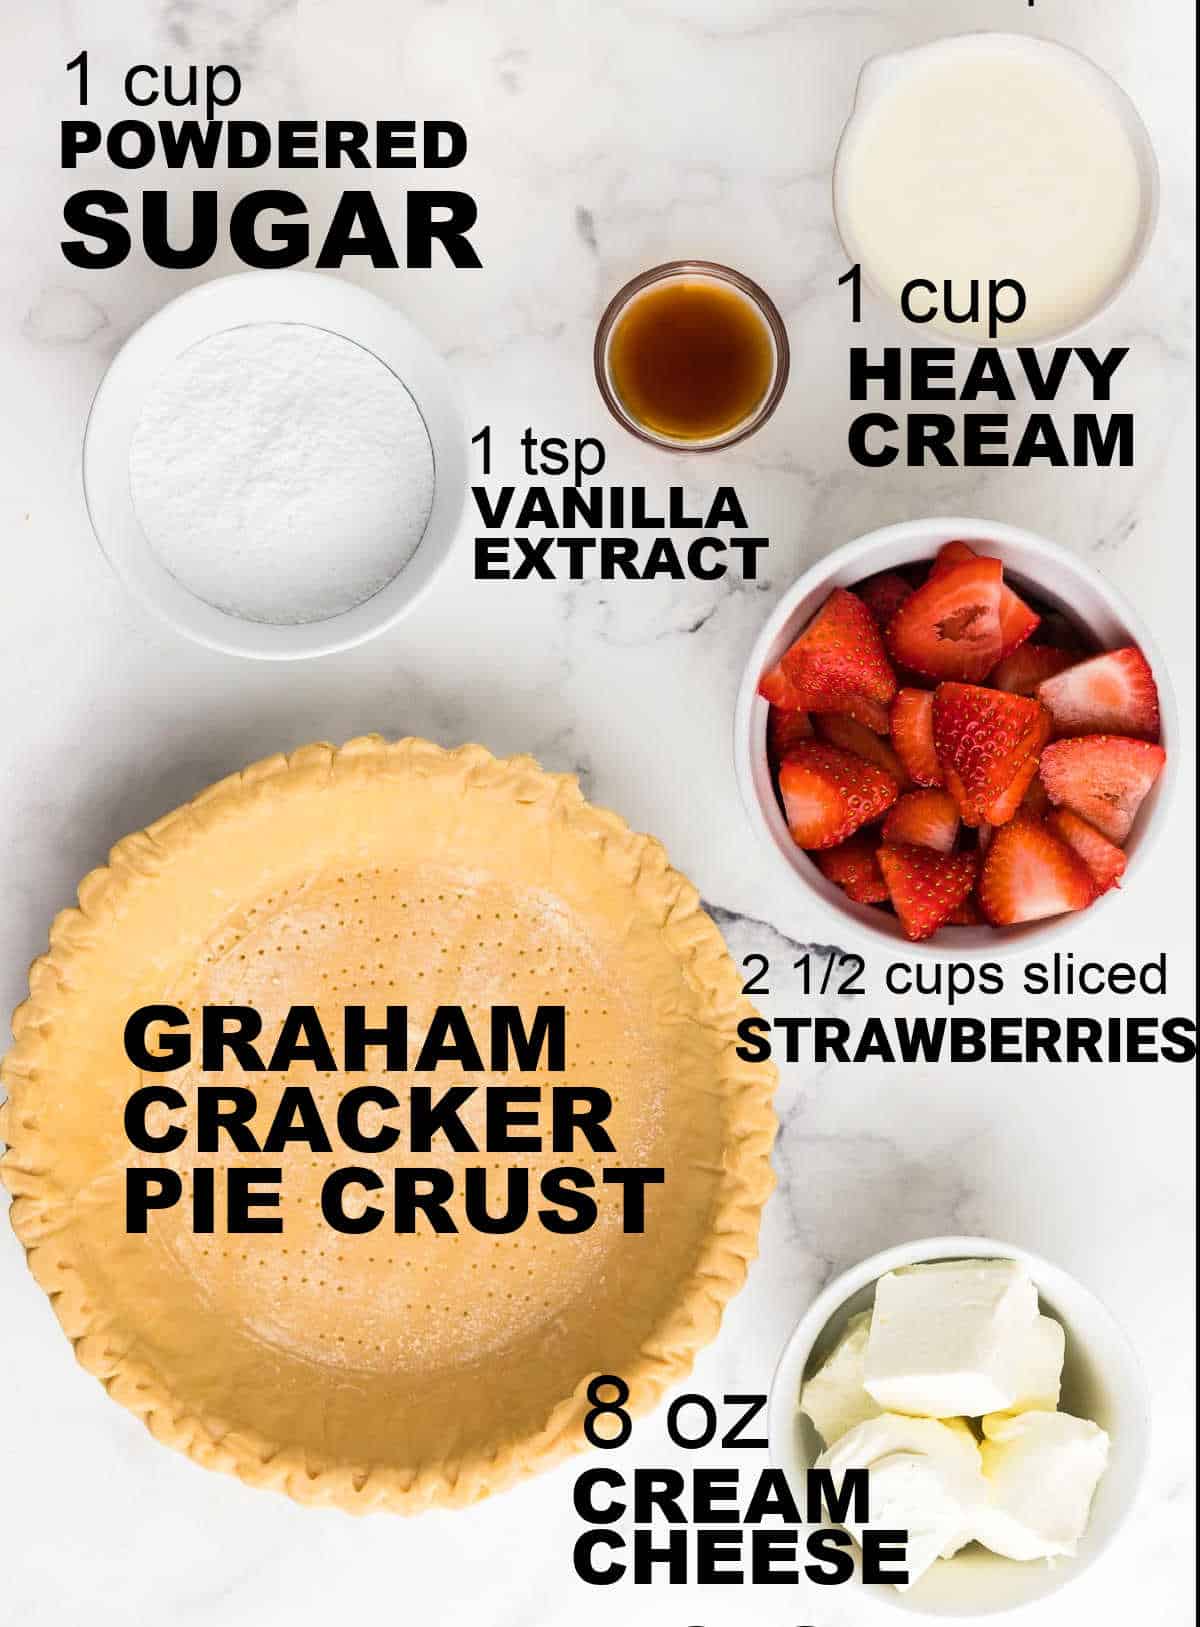 Ingredients needed to make a creamy Strawberry Pie. 